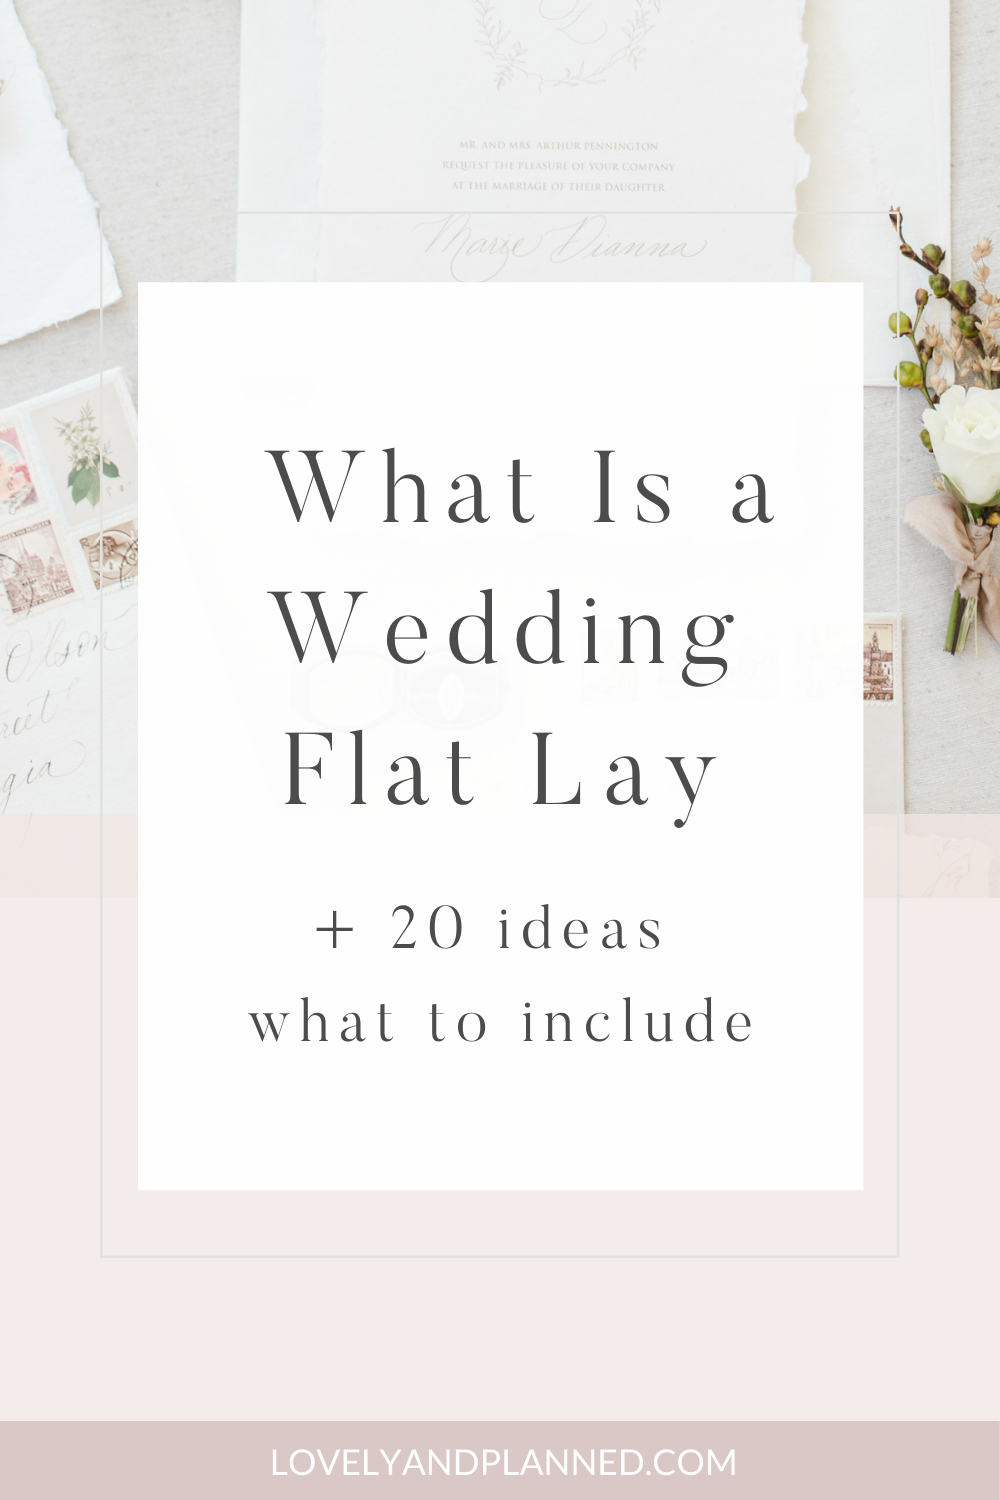 A wedding flat lay is a photo artistically styled with your wedding invitation and other meaningful wedding details. In this blog post, I list 20 ideas that to include in your wedding details photography.  #lovelyandplanned 